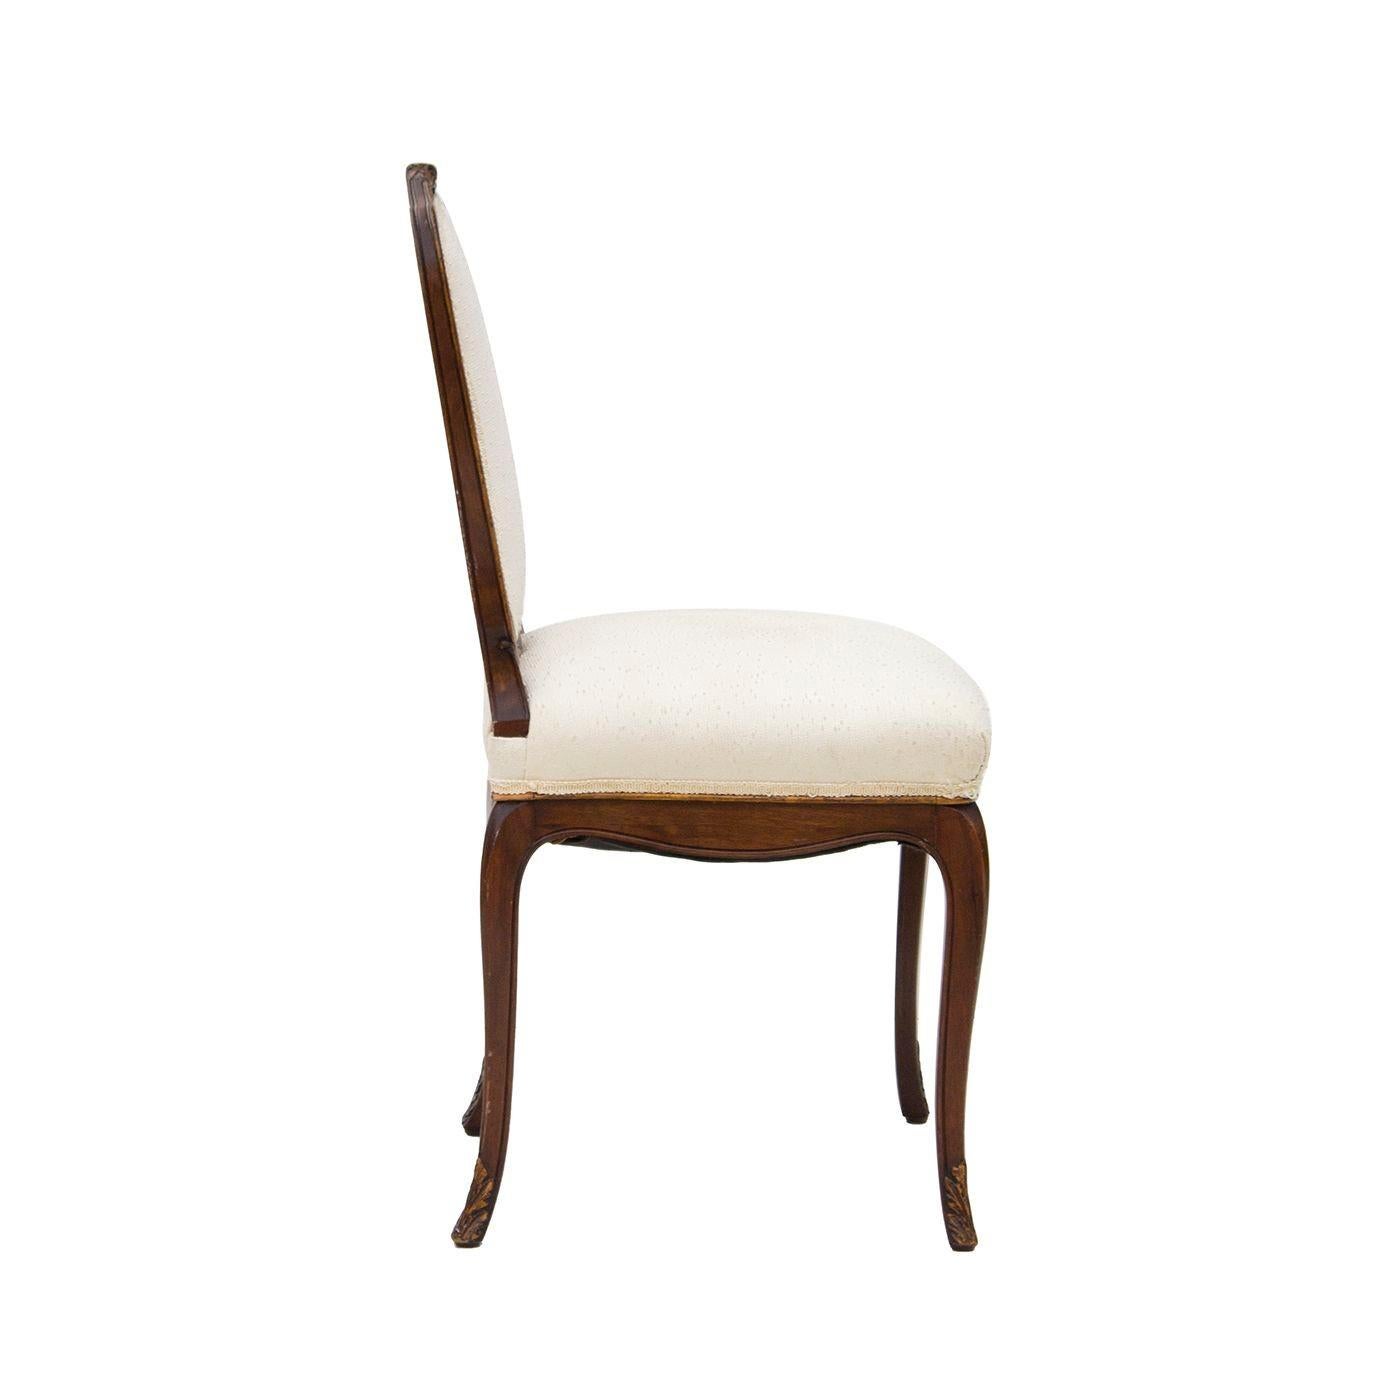 Mid-20th Century French Style Side Chair with Carved Frame For Sale